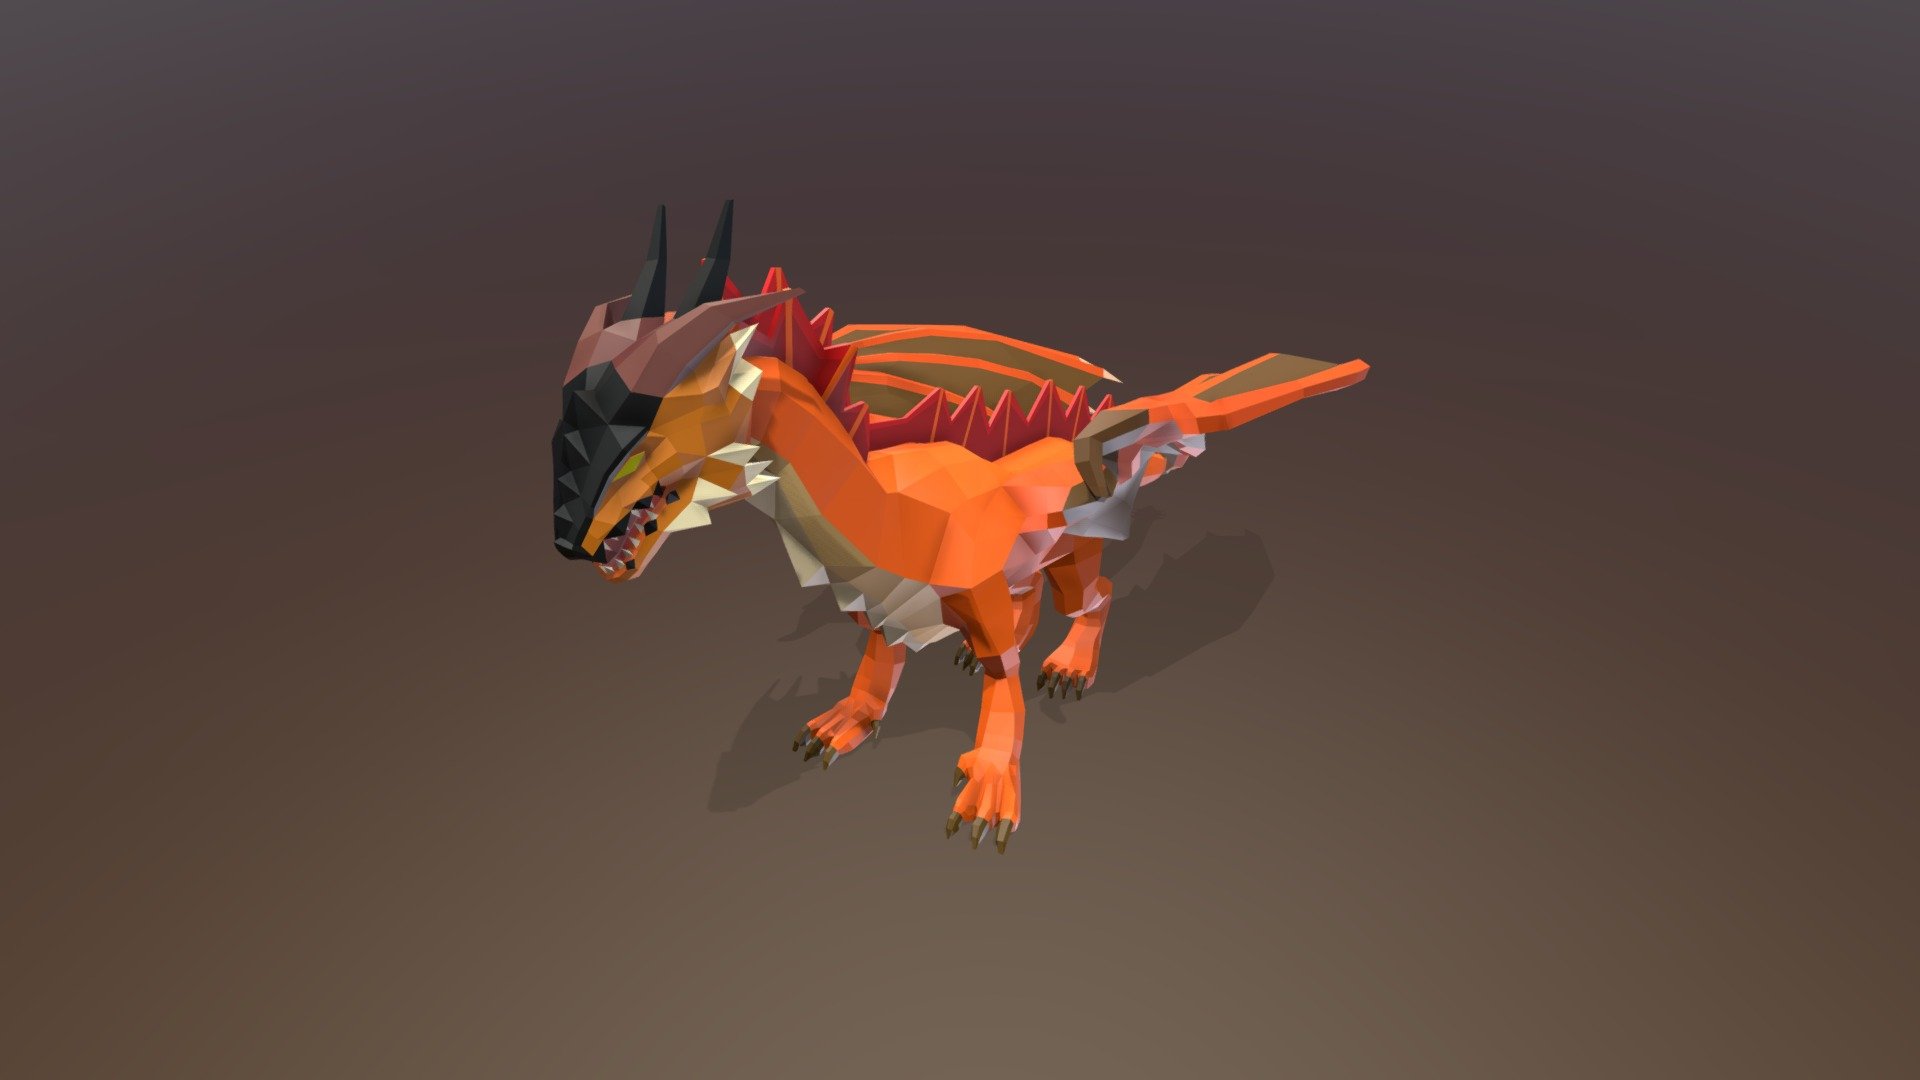 Animated low poly dragons. Available for Unity and Unreal 3d model